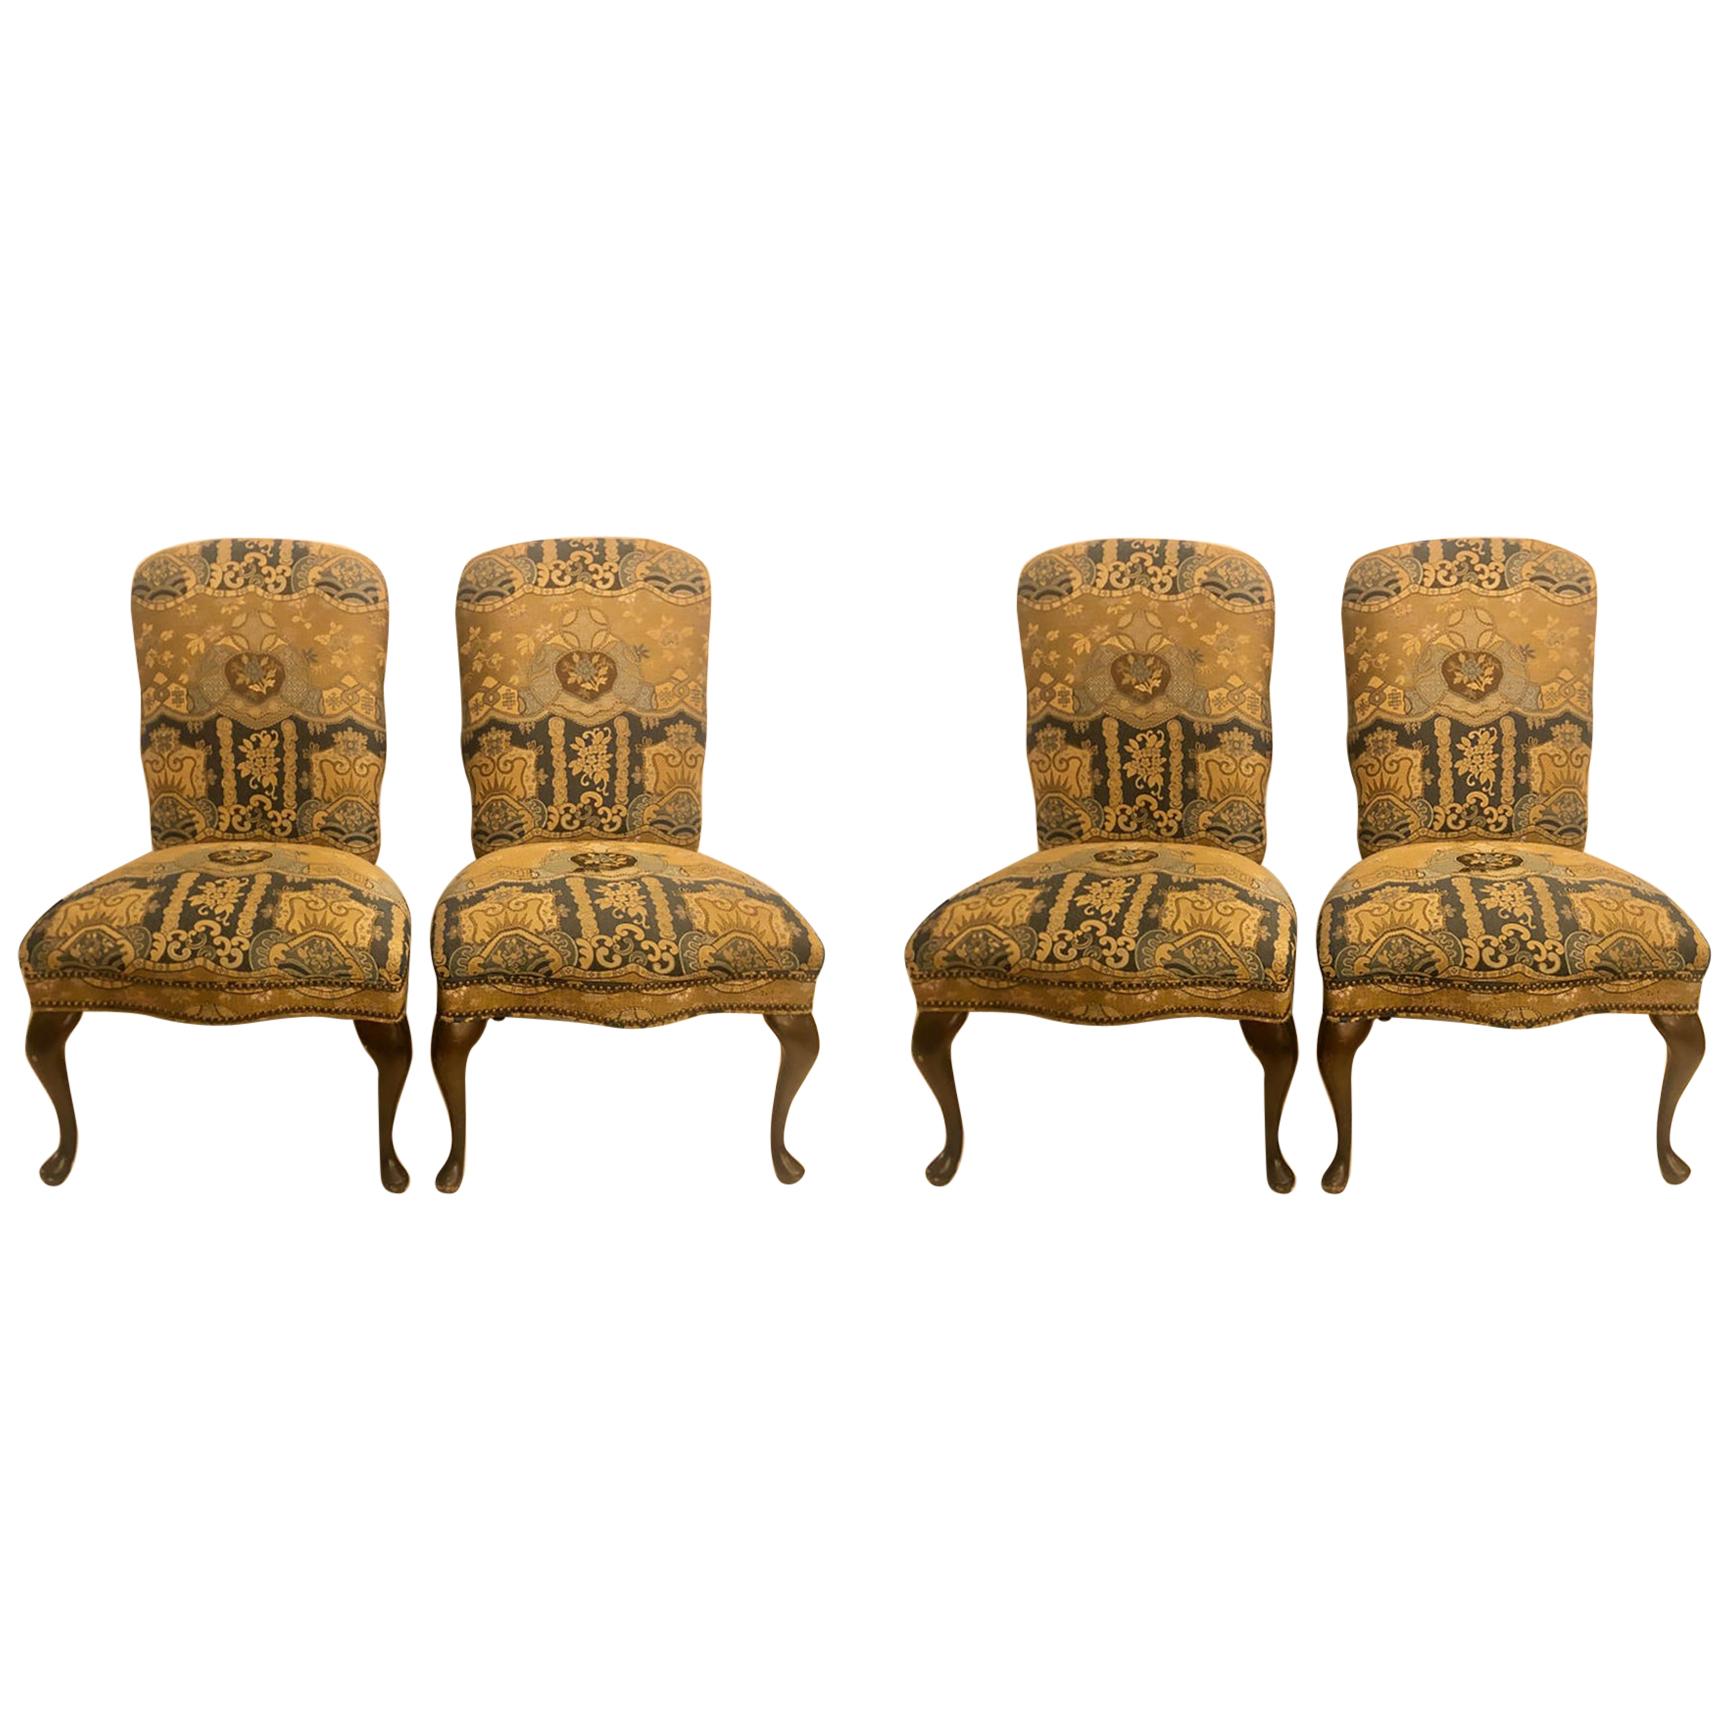 Set of Four Queen Anne High Back Dining Chairs